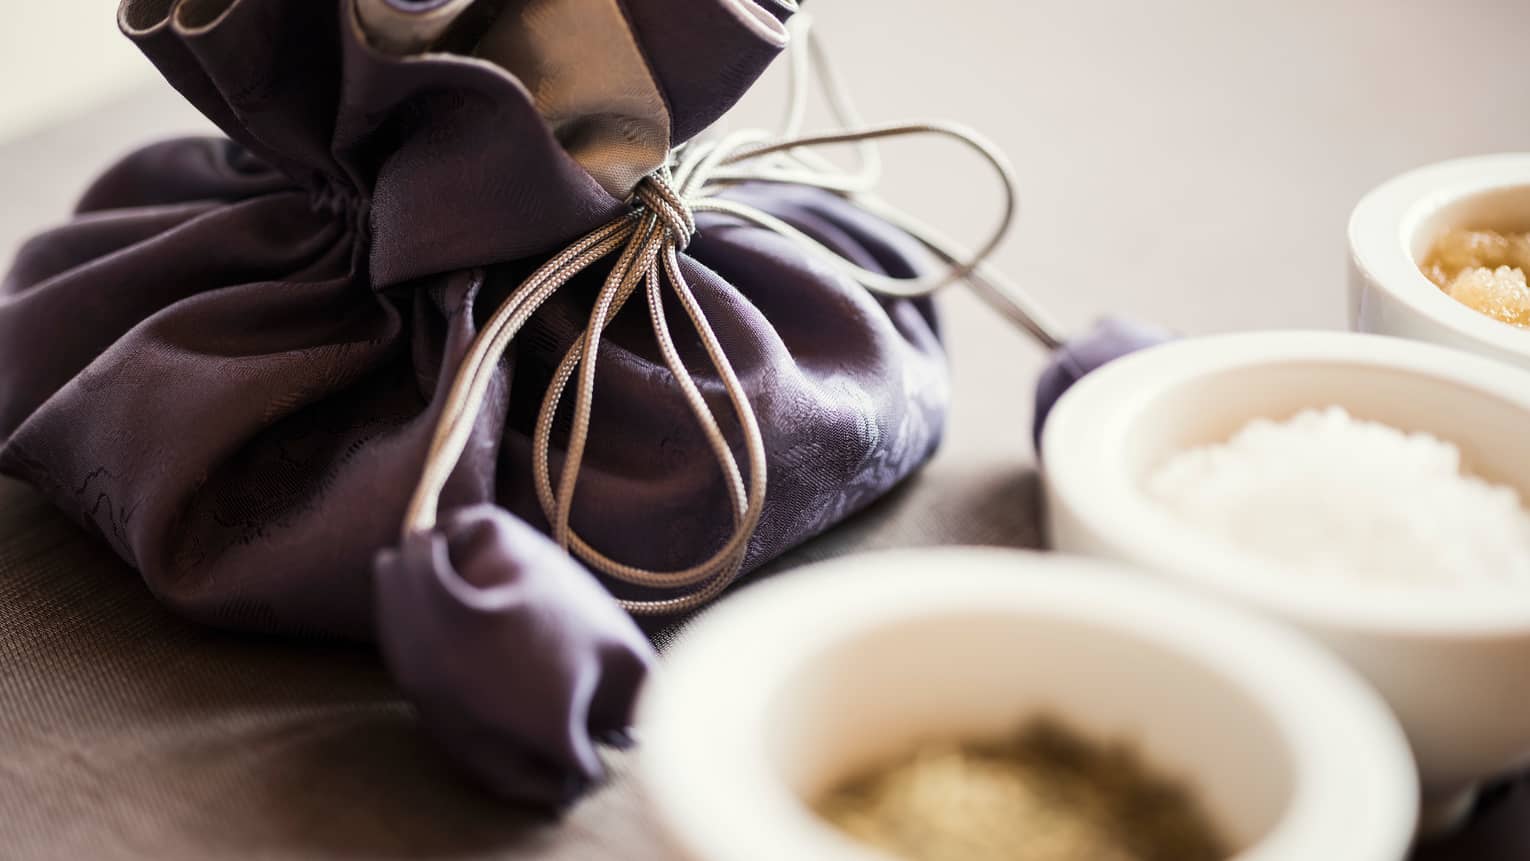 Dark silk pouch with tie behind small white ceramic bowls with spa salts